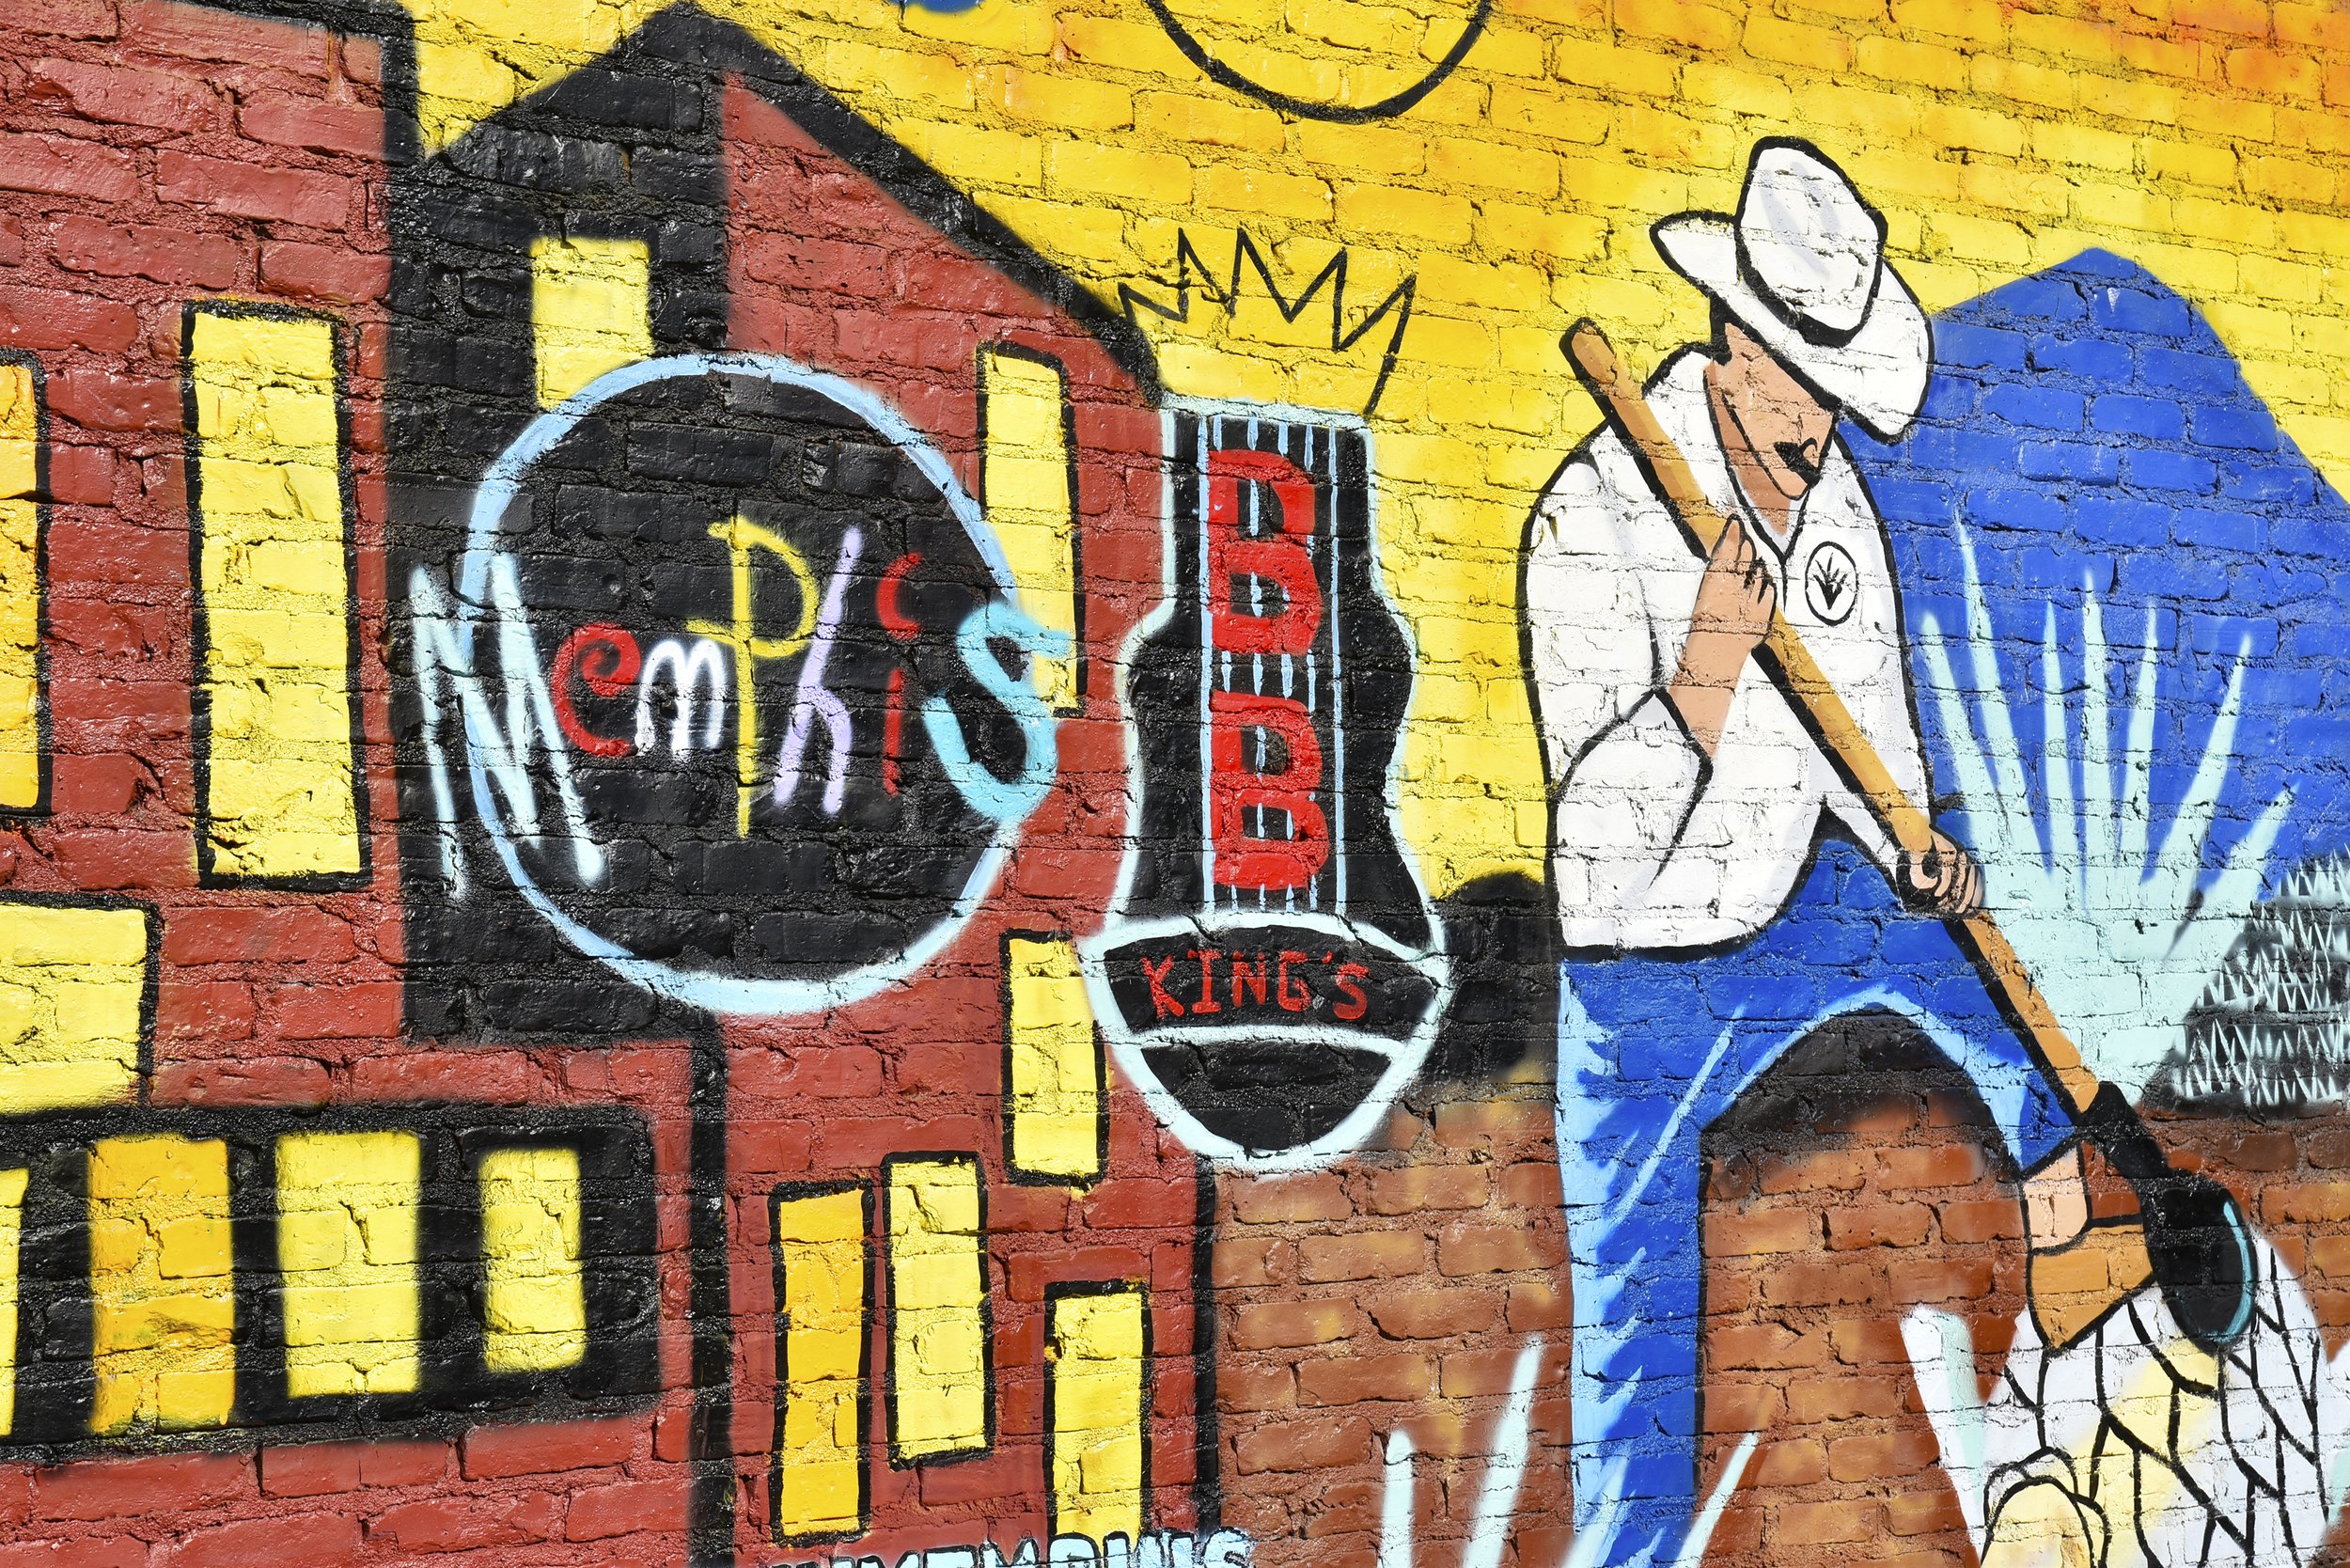  Mural as seen at Agavos Cocina Memphis featuring artistic interpretation of Beale Street’s BB King’s and Memphis Music signs  Mural art by @carlosgma13 (?) 